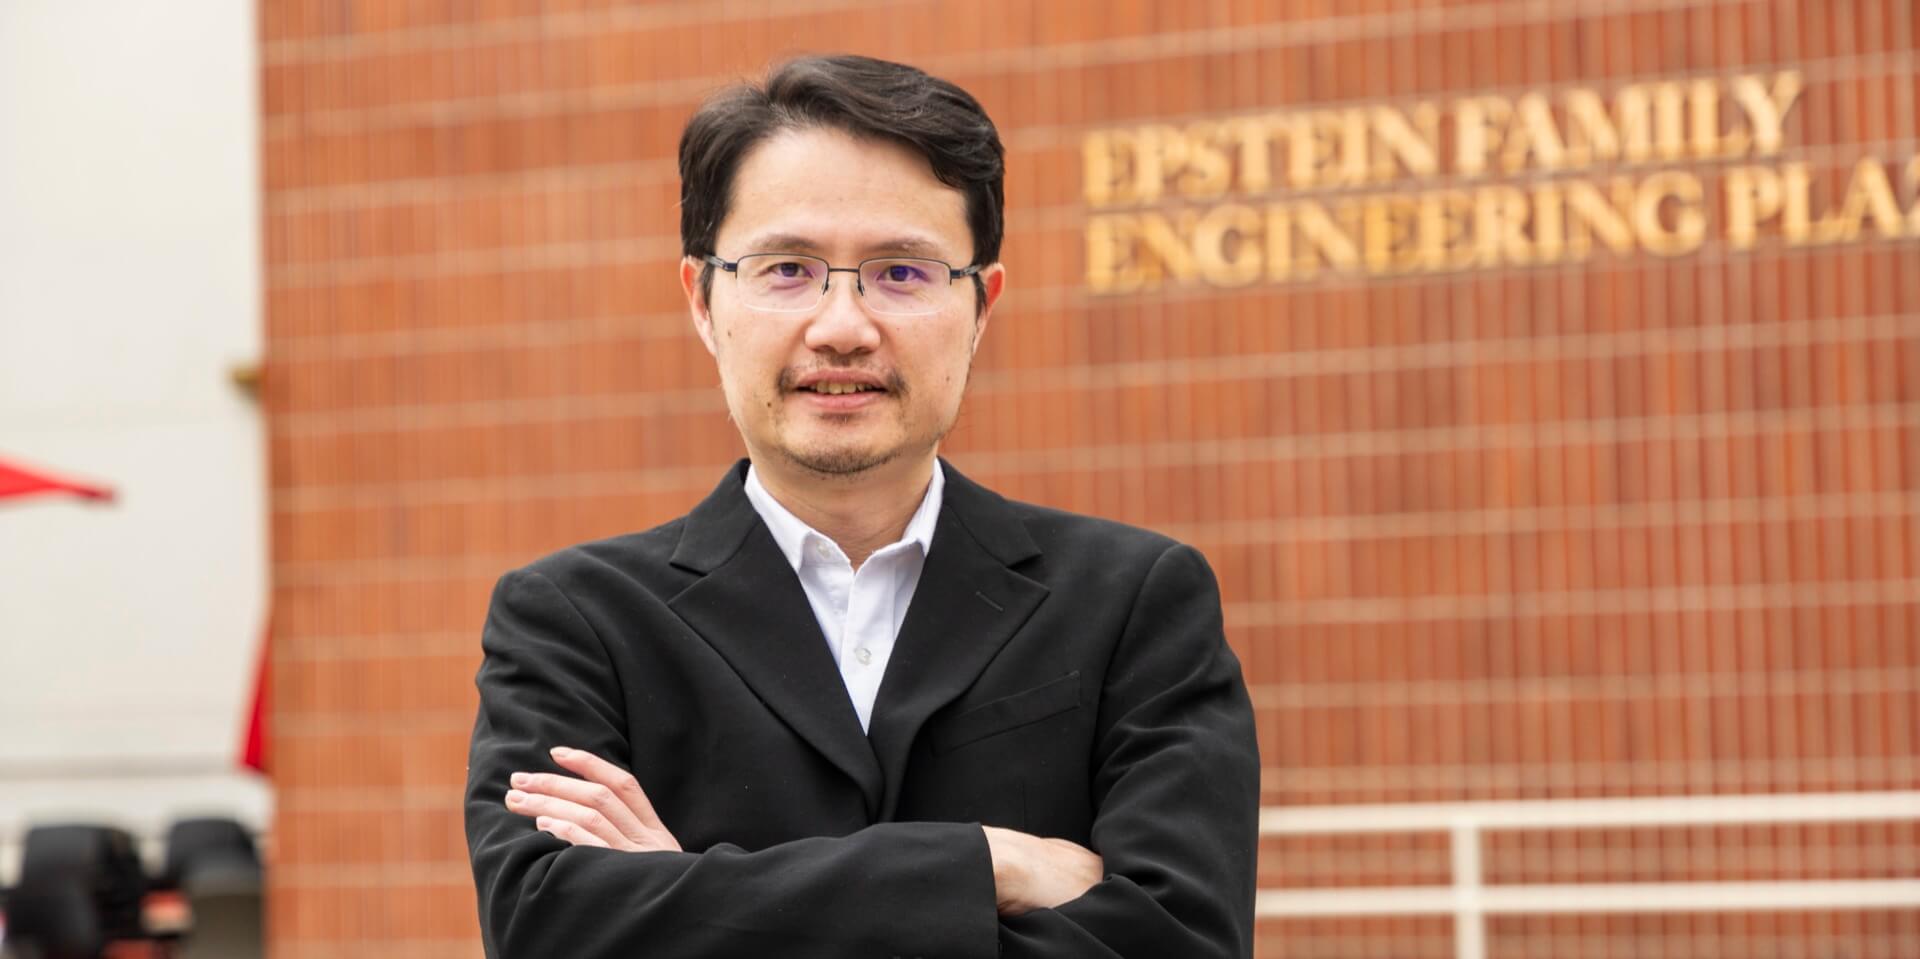 Professor Mike Shuo-Wei Chen of the USC Viterbi School's Ming Hsieh Department of Electrical and Computer Engineering.